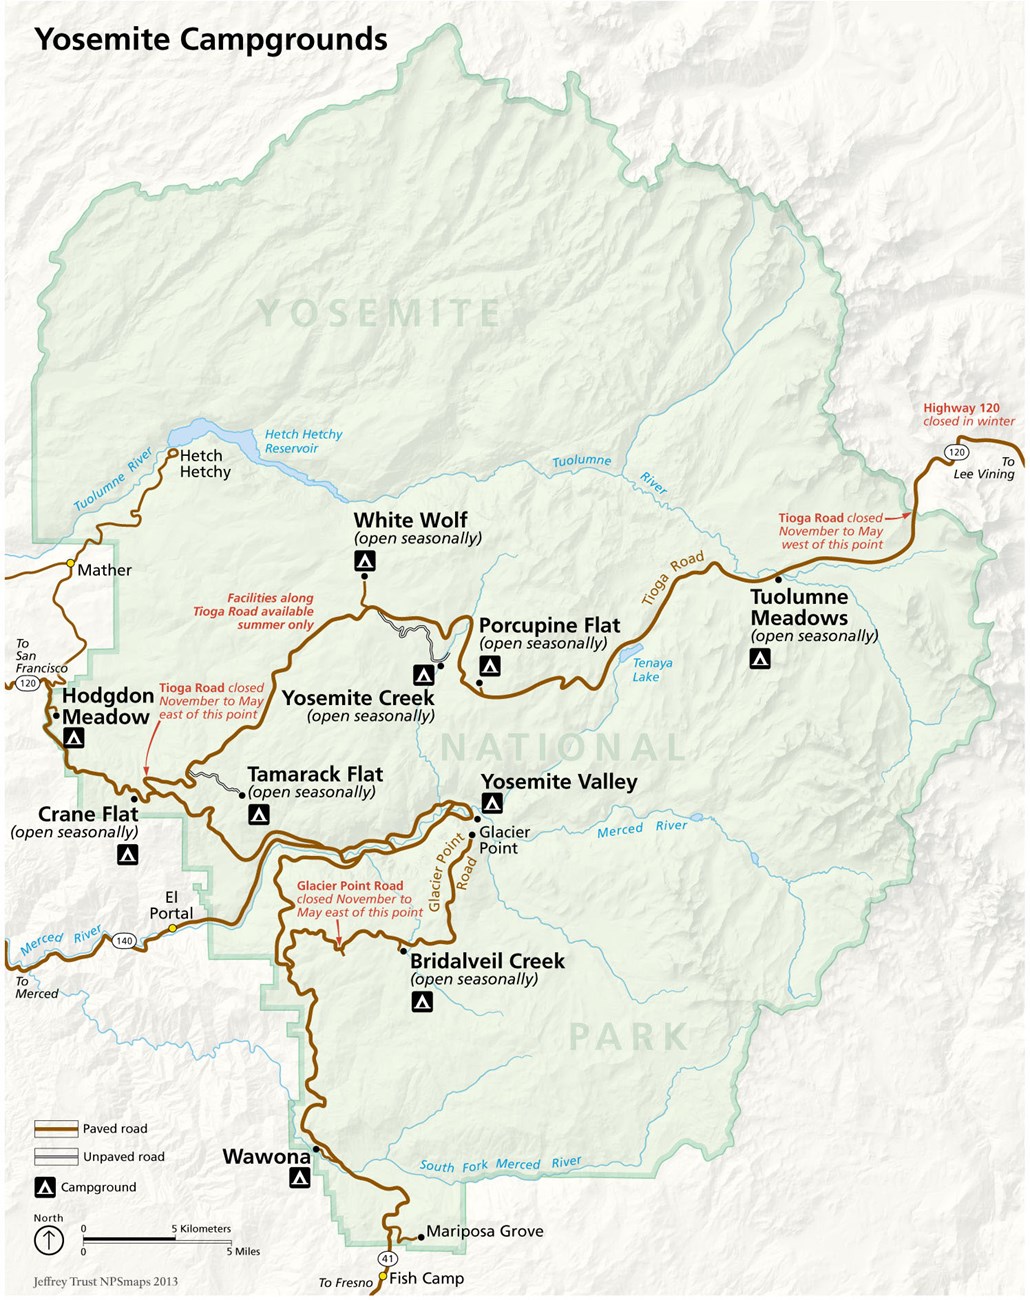 Map showing campgrounds throughout the park